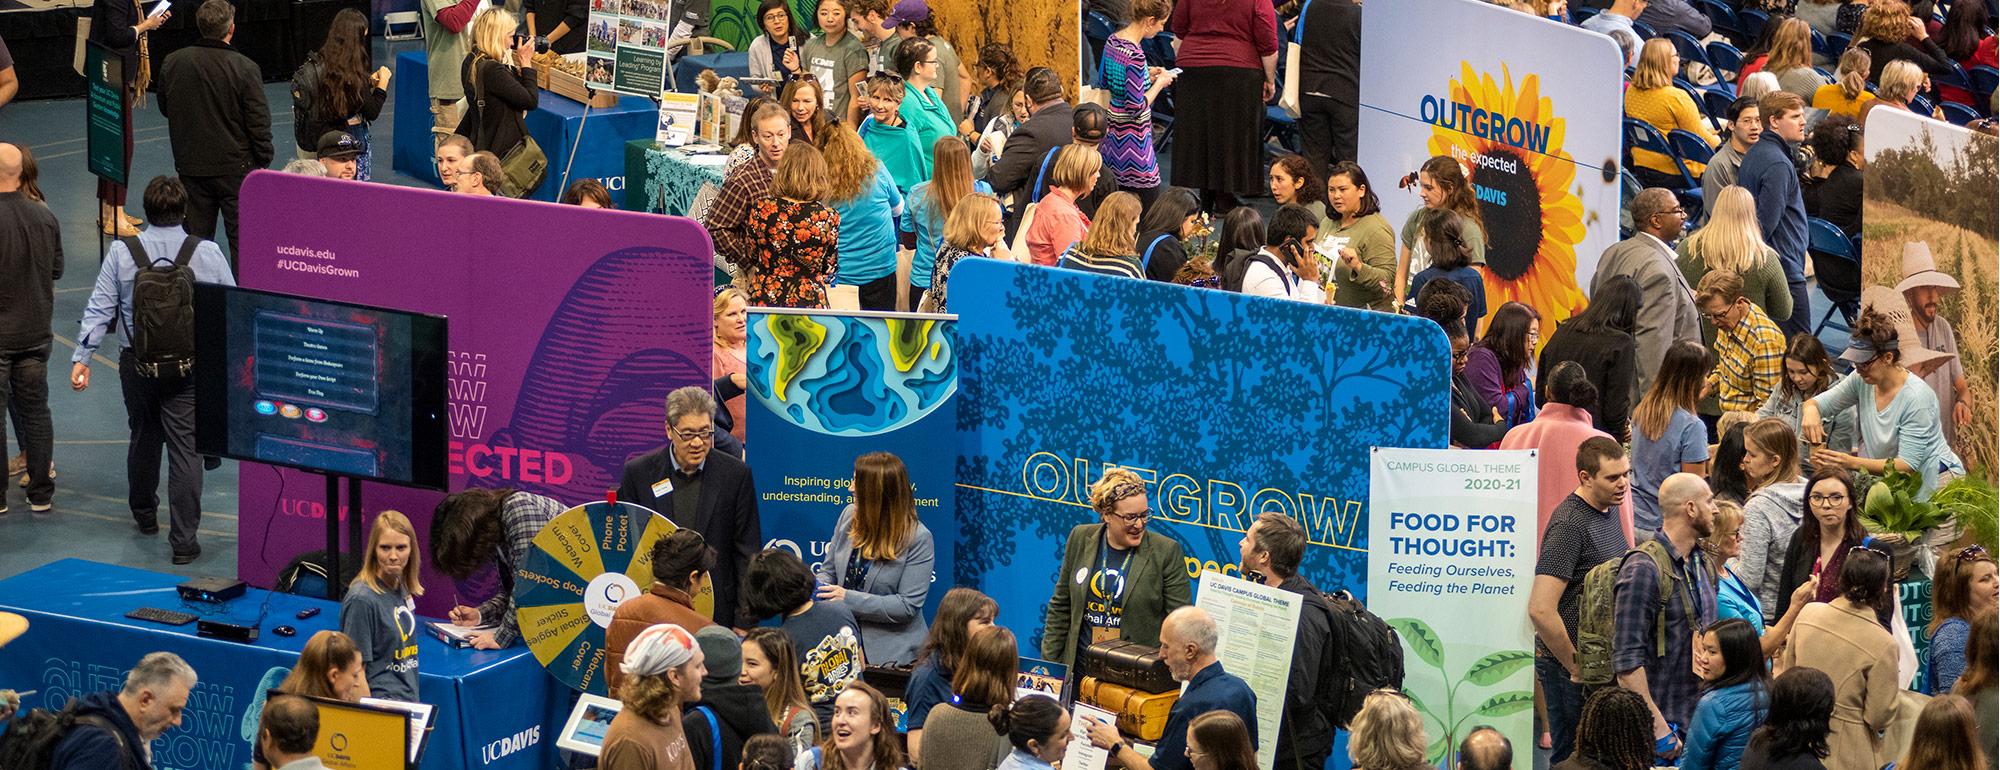 students and staff gathered at the UC Davis rebrand event 'Outgrow the Expected'